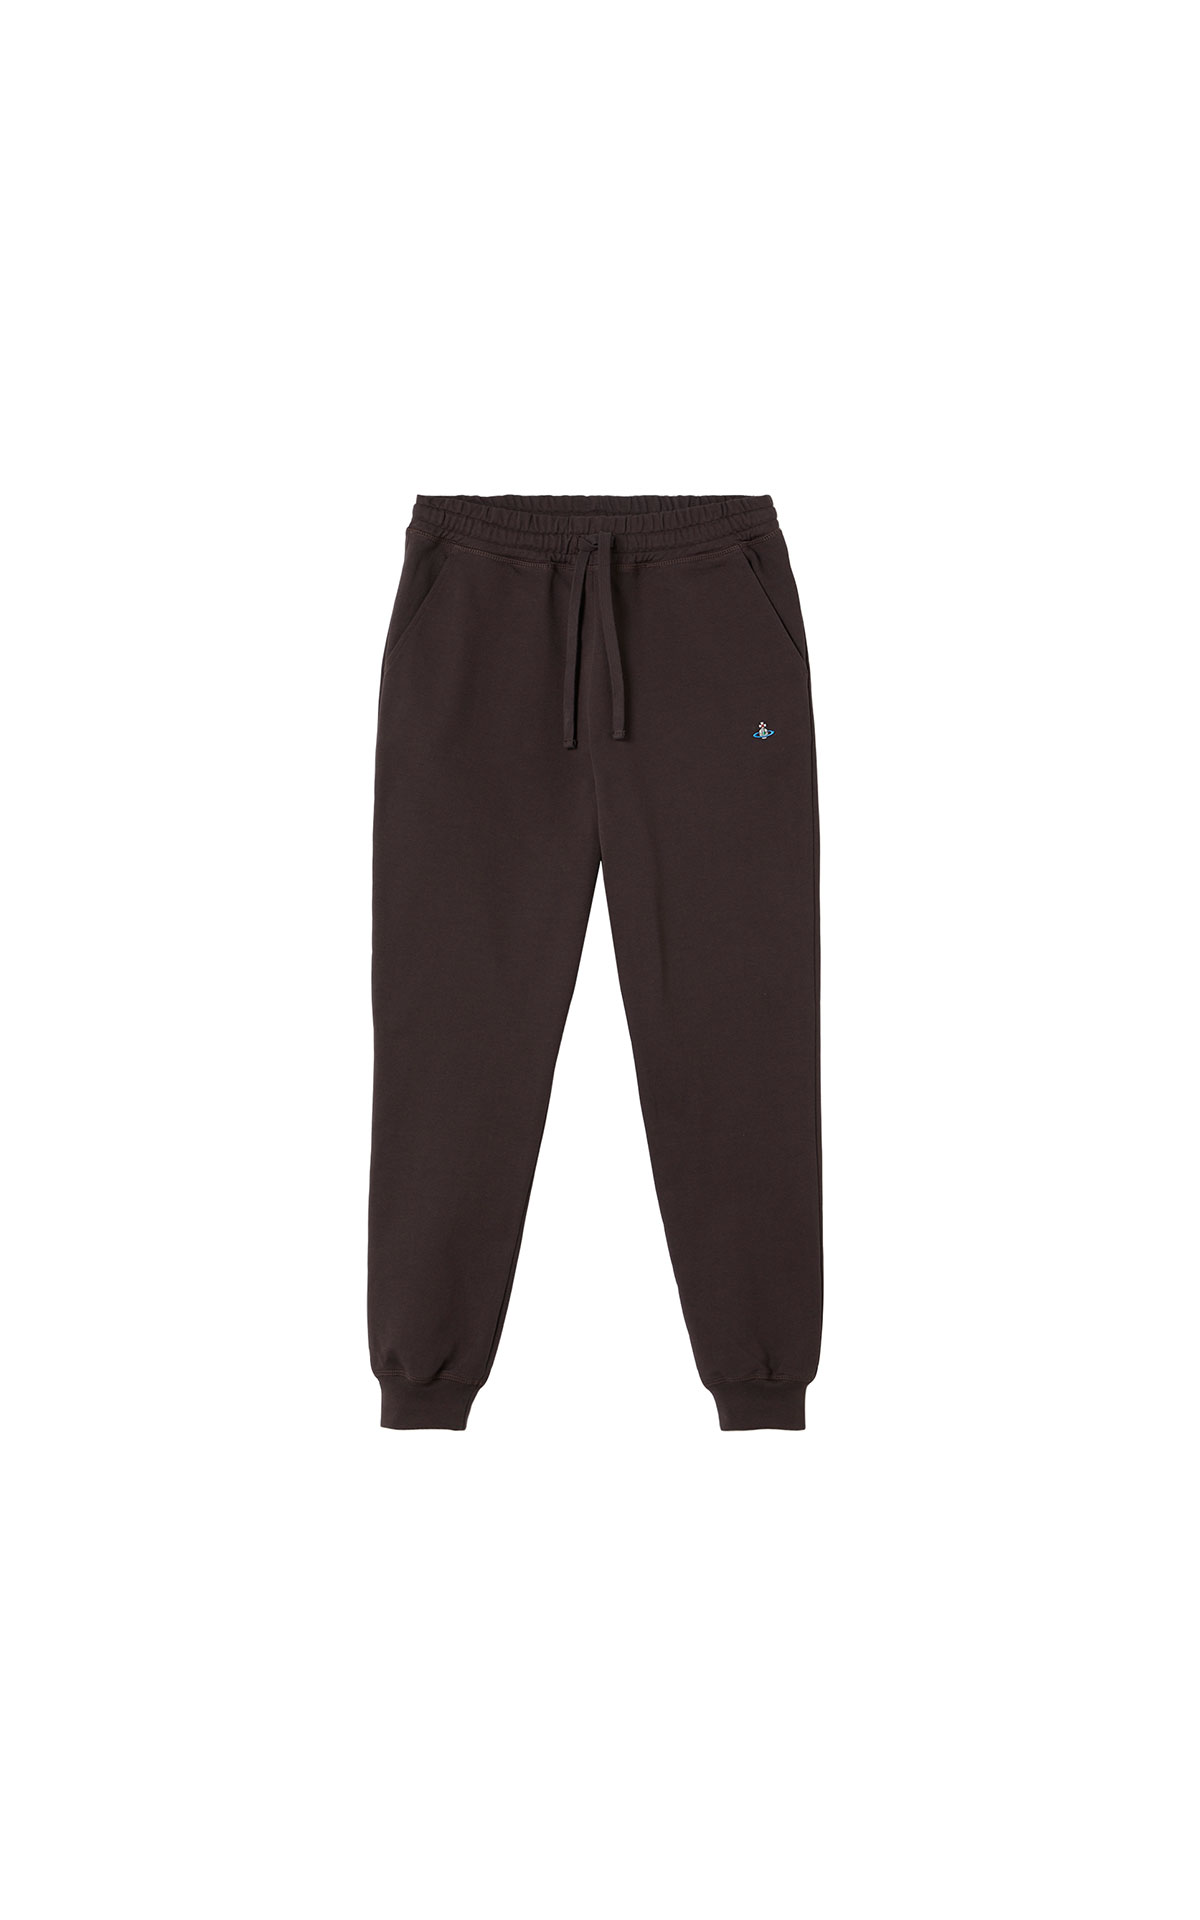 Vivienne Westwood Classic sweatpants from Bicester Village